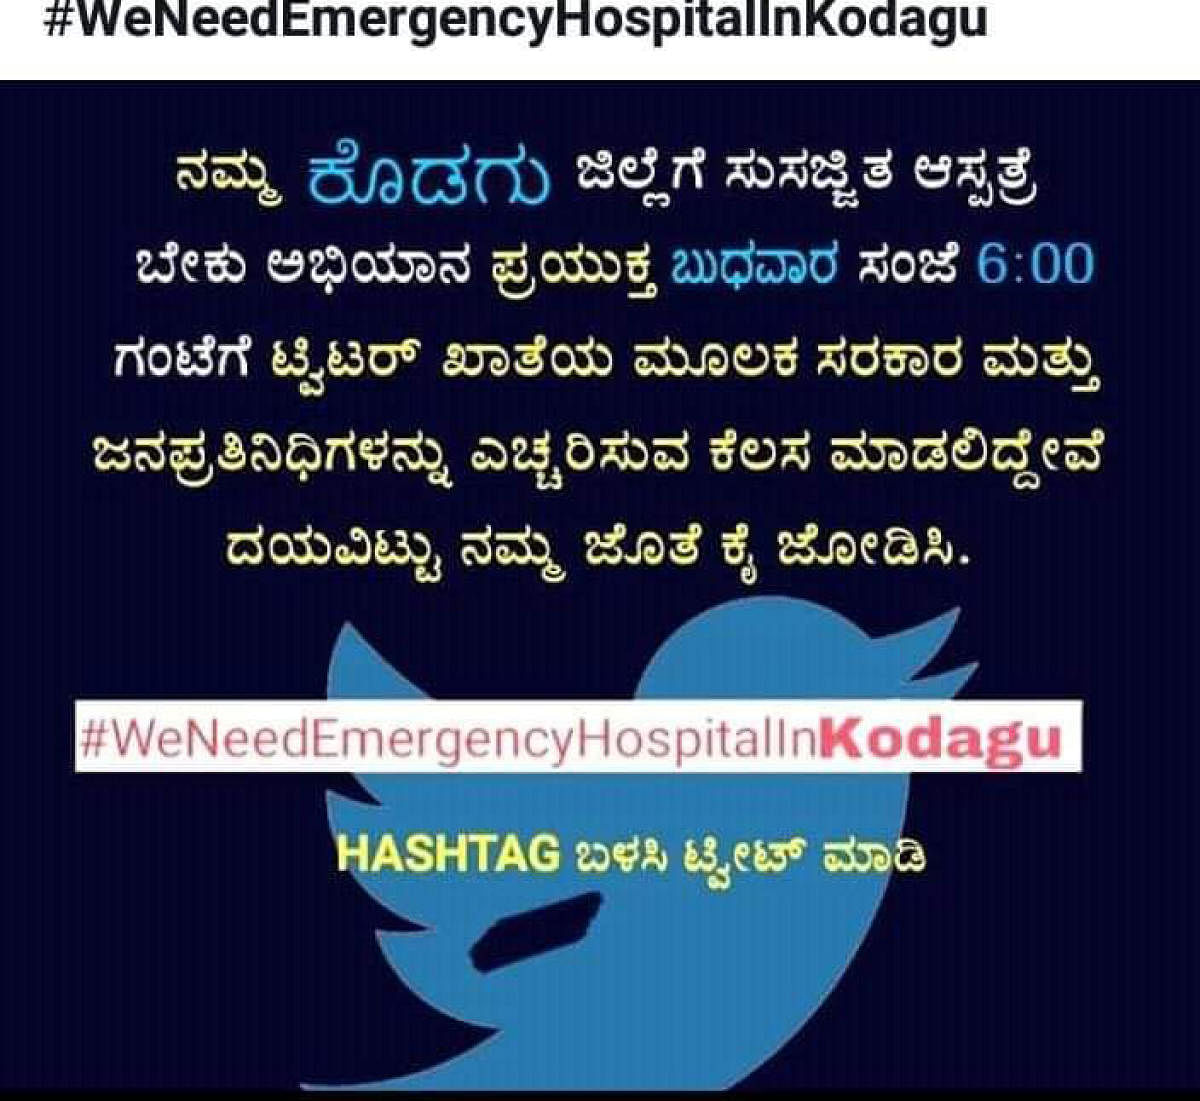 Twitter campaign demanding super-speciality hospital